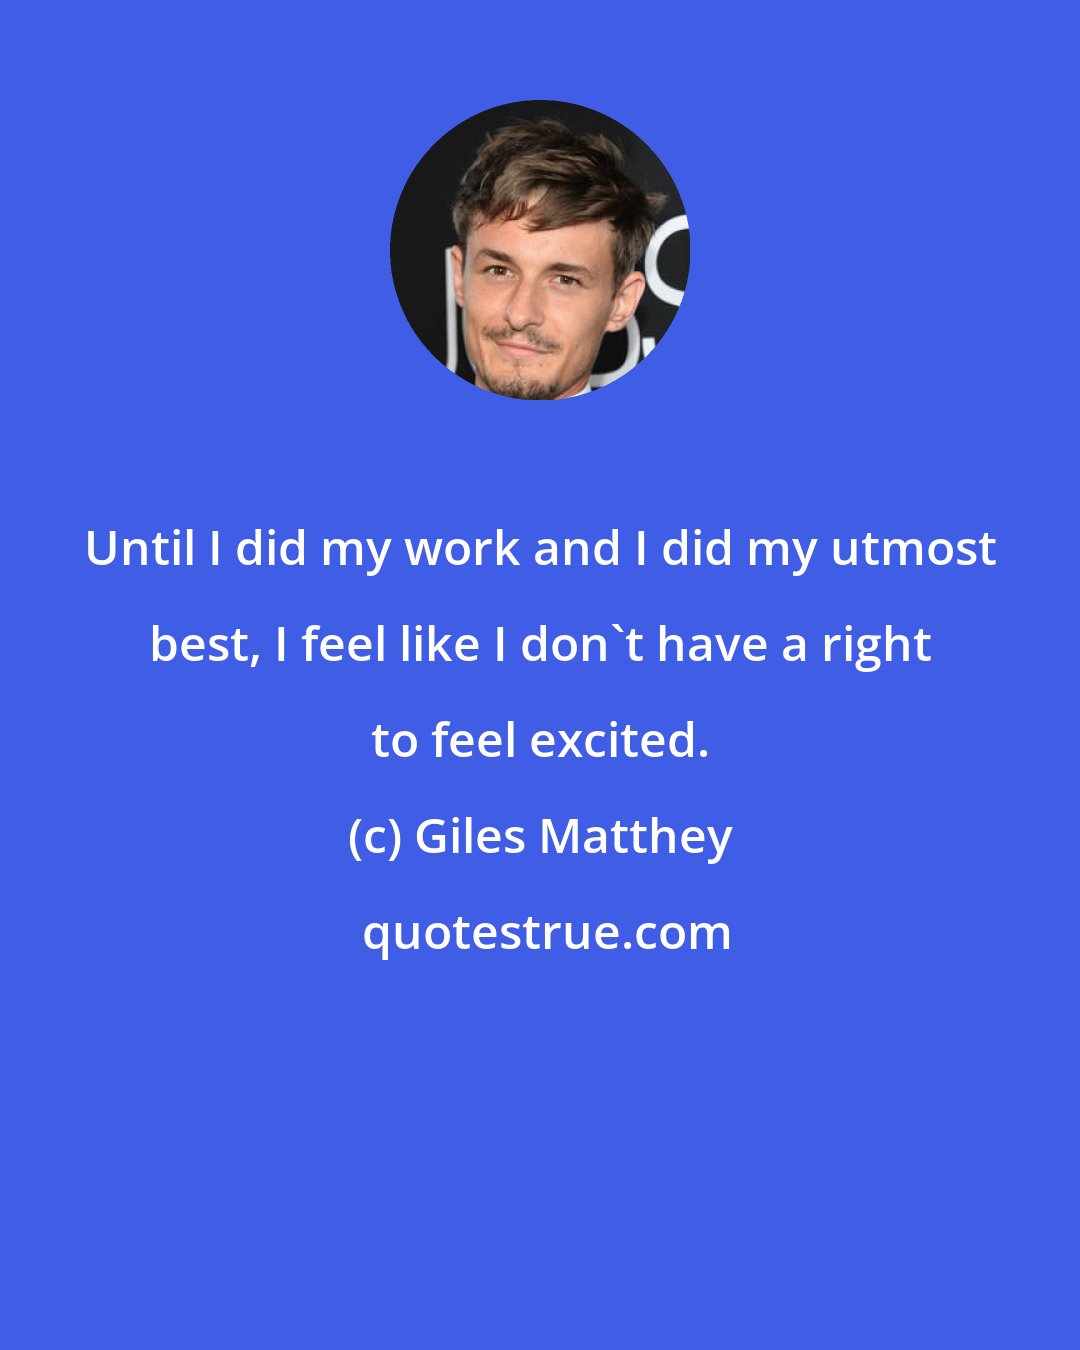 Giles Matthey: Until I did my work and I did my utmost best, I feel like I don't have a right to feel excited.